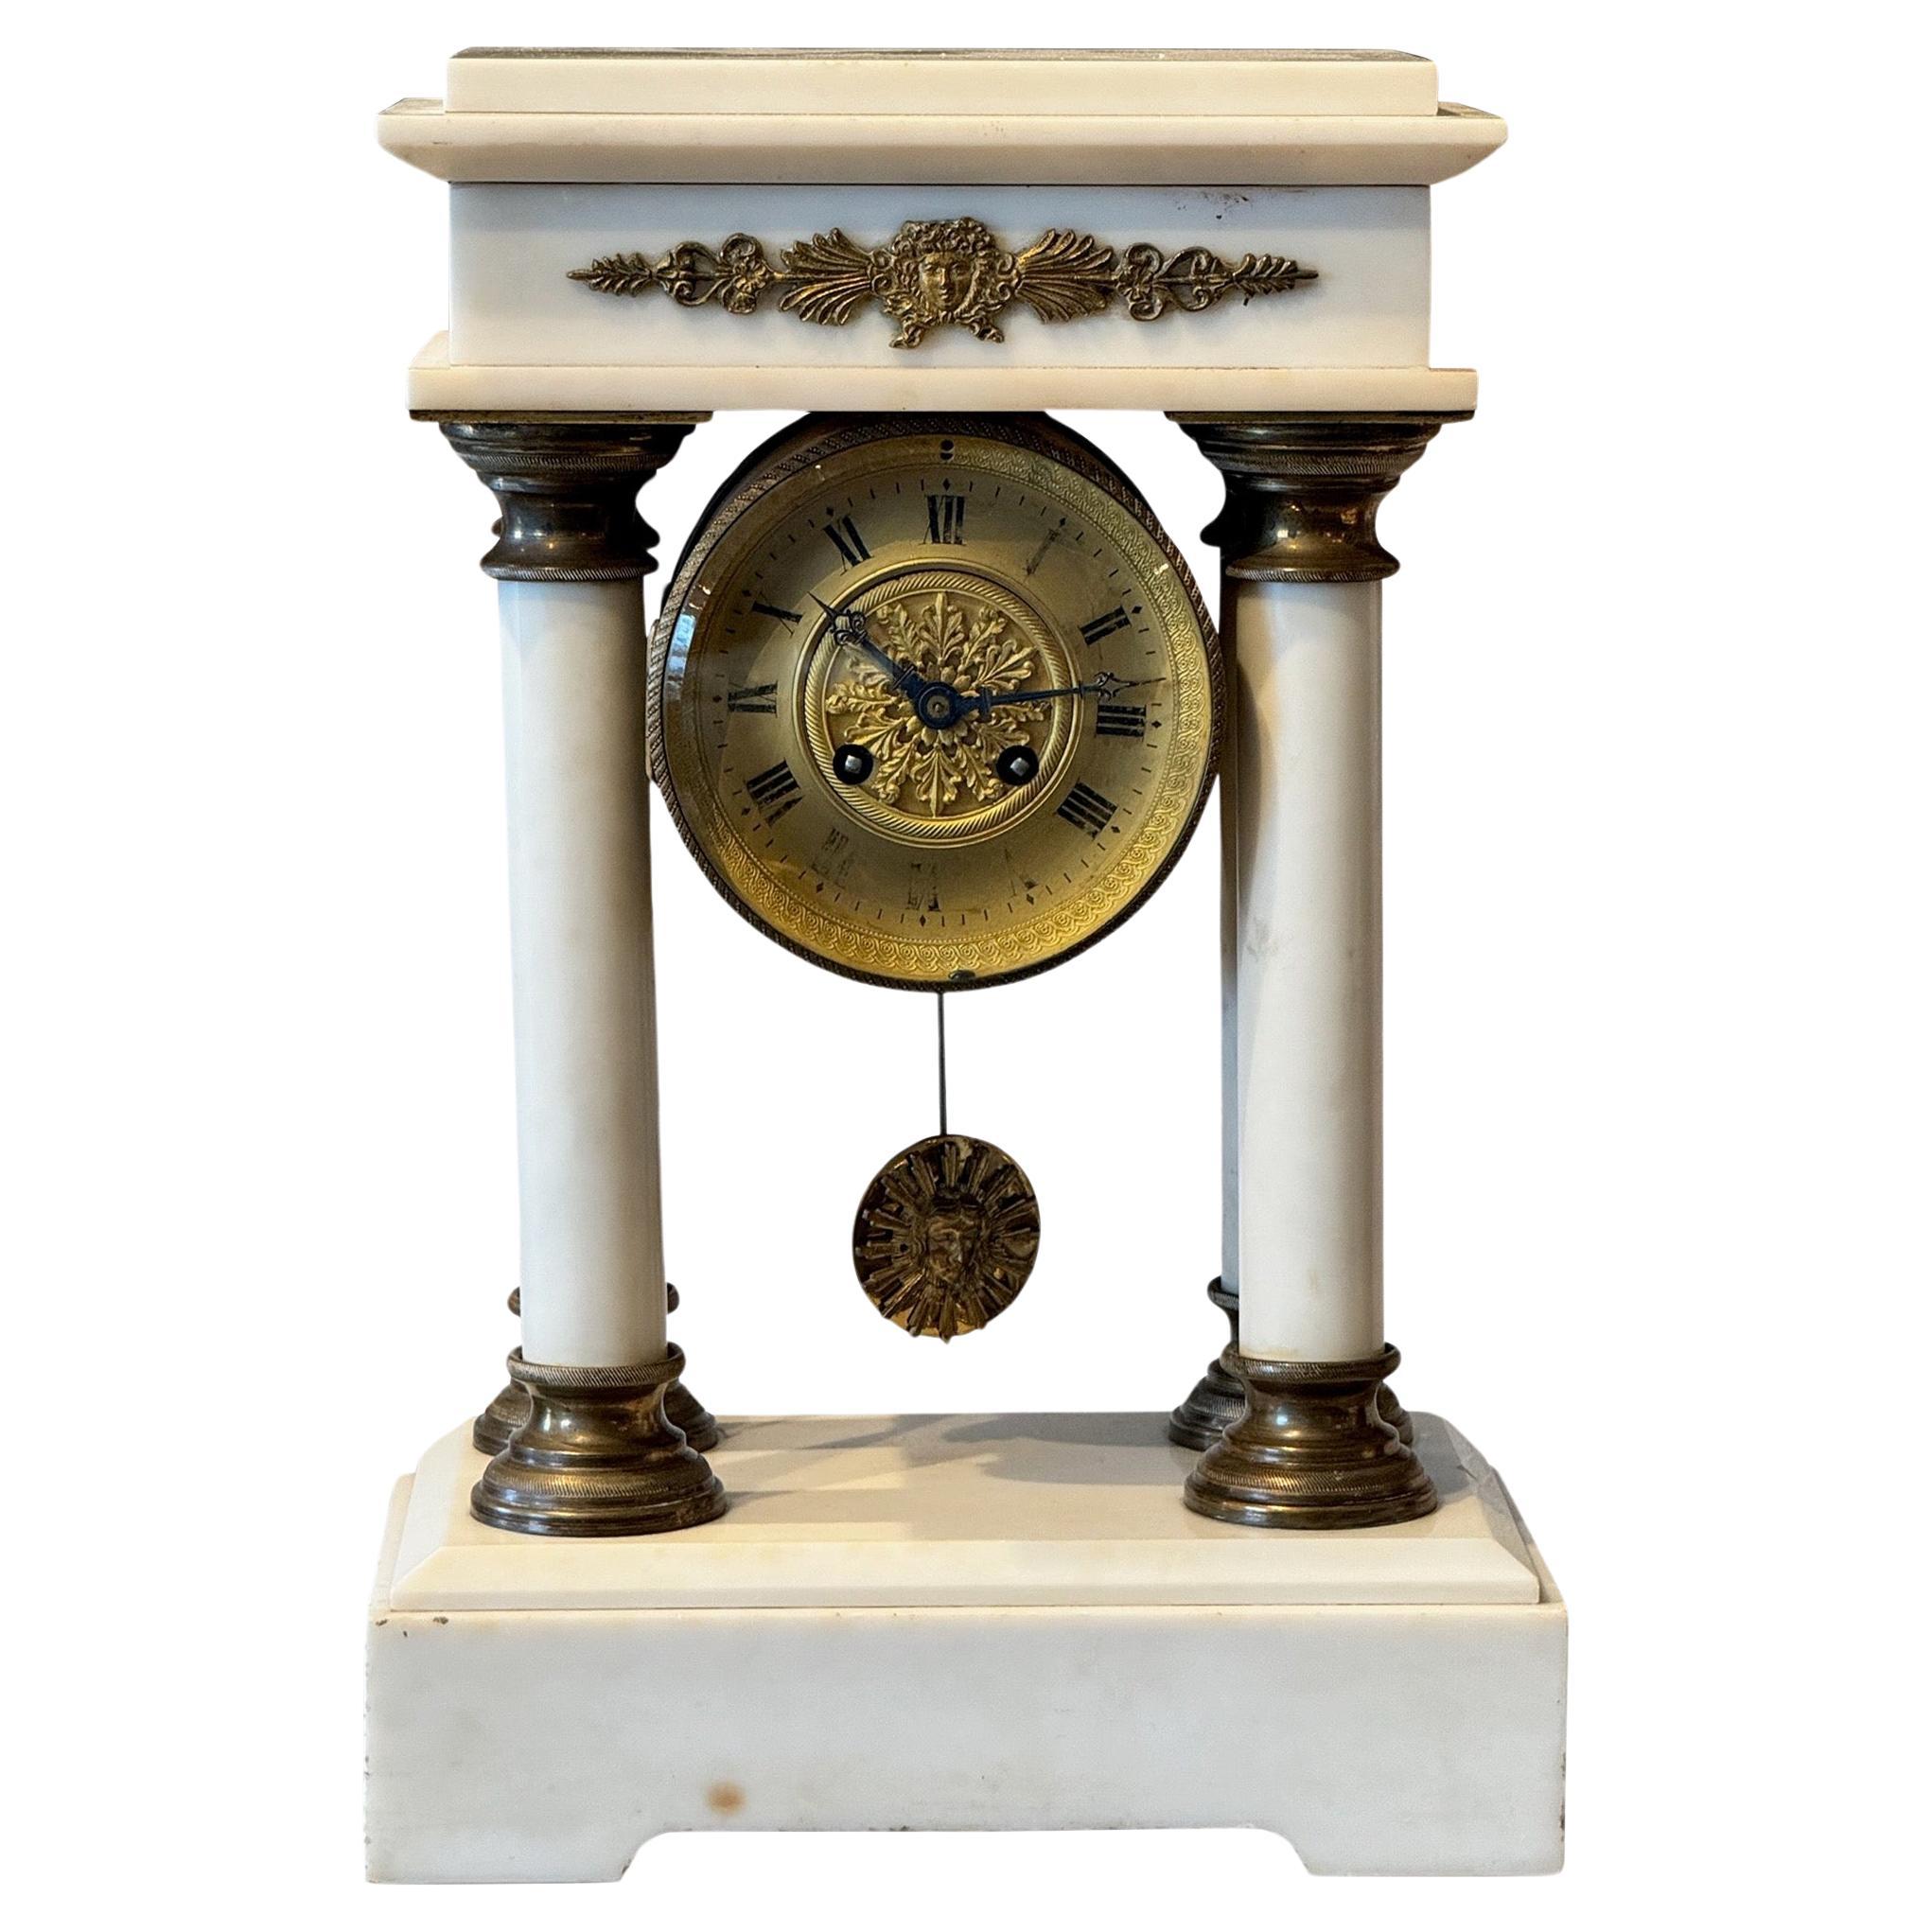 19th Century French Marble Mantle Clock